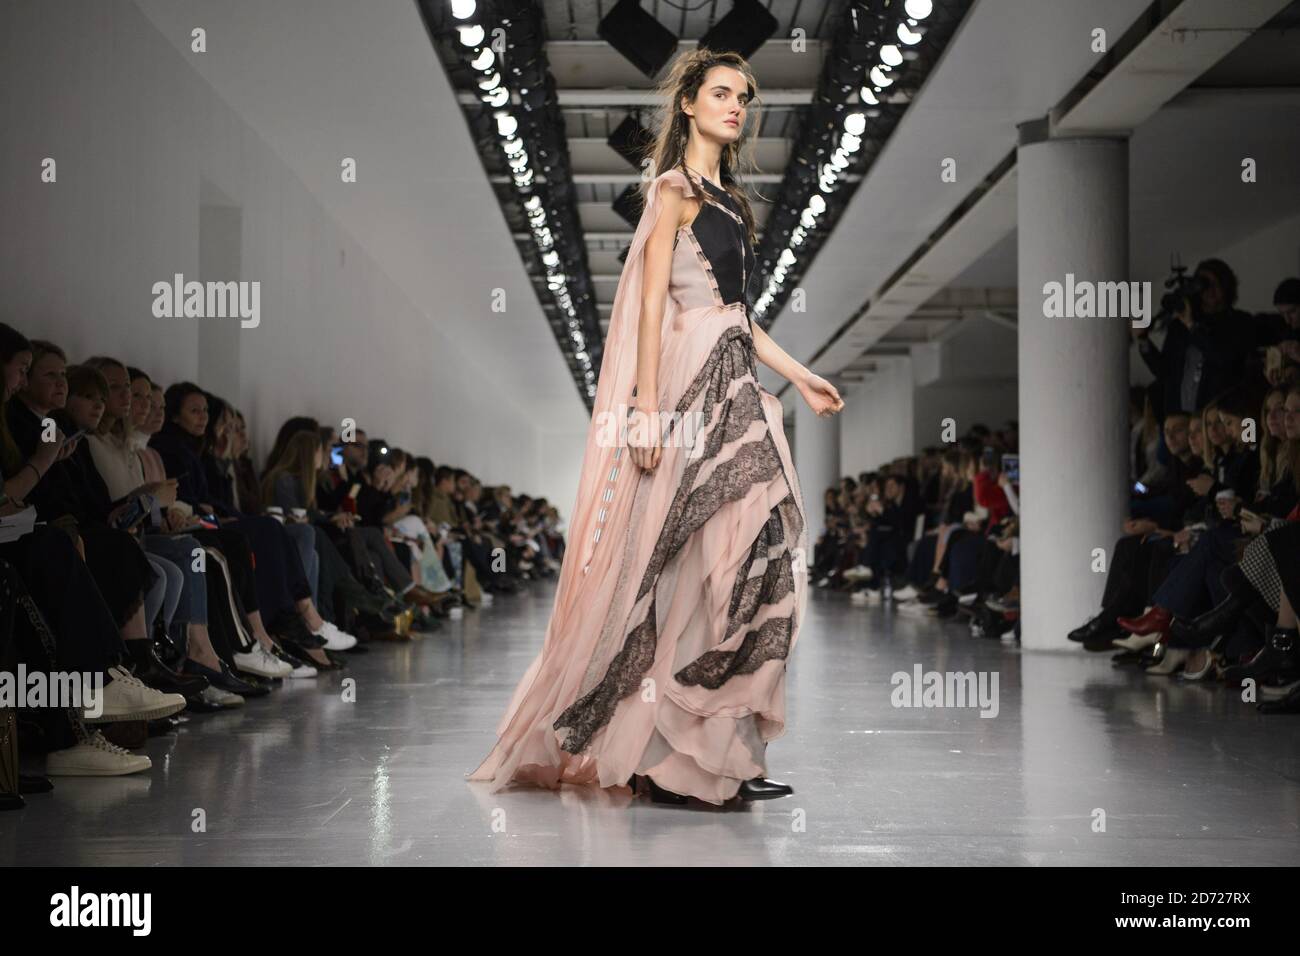 Models on the catwalk during the Antonio Berardi Autumn/Winter 2017 London Fashion Week show at the BFC venue at 180 Strand, London. Picture date: Monday February 20th, 2017. Photo credit should read: Matt Crossick/ EMPICS Entertainment. Stock Photo